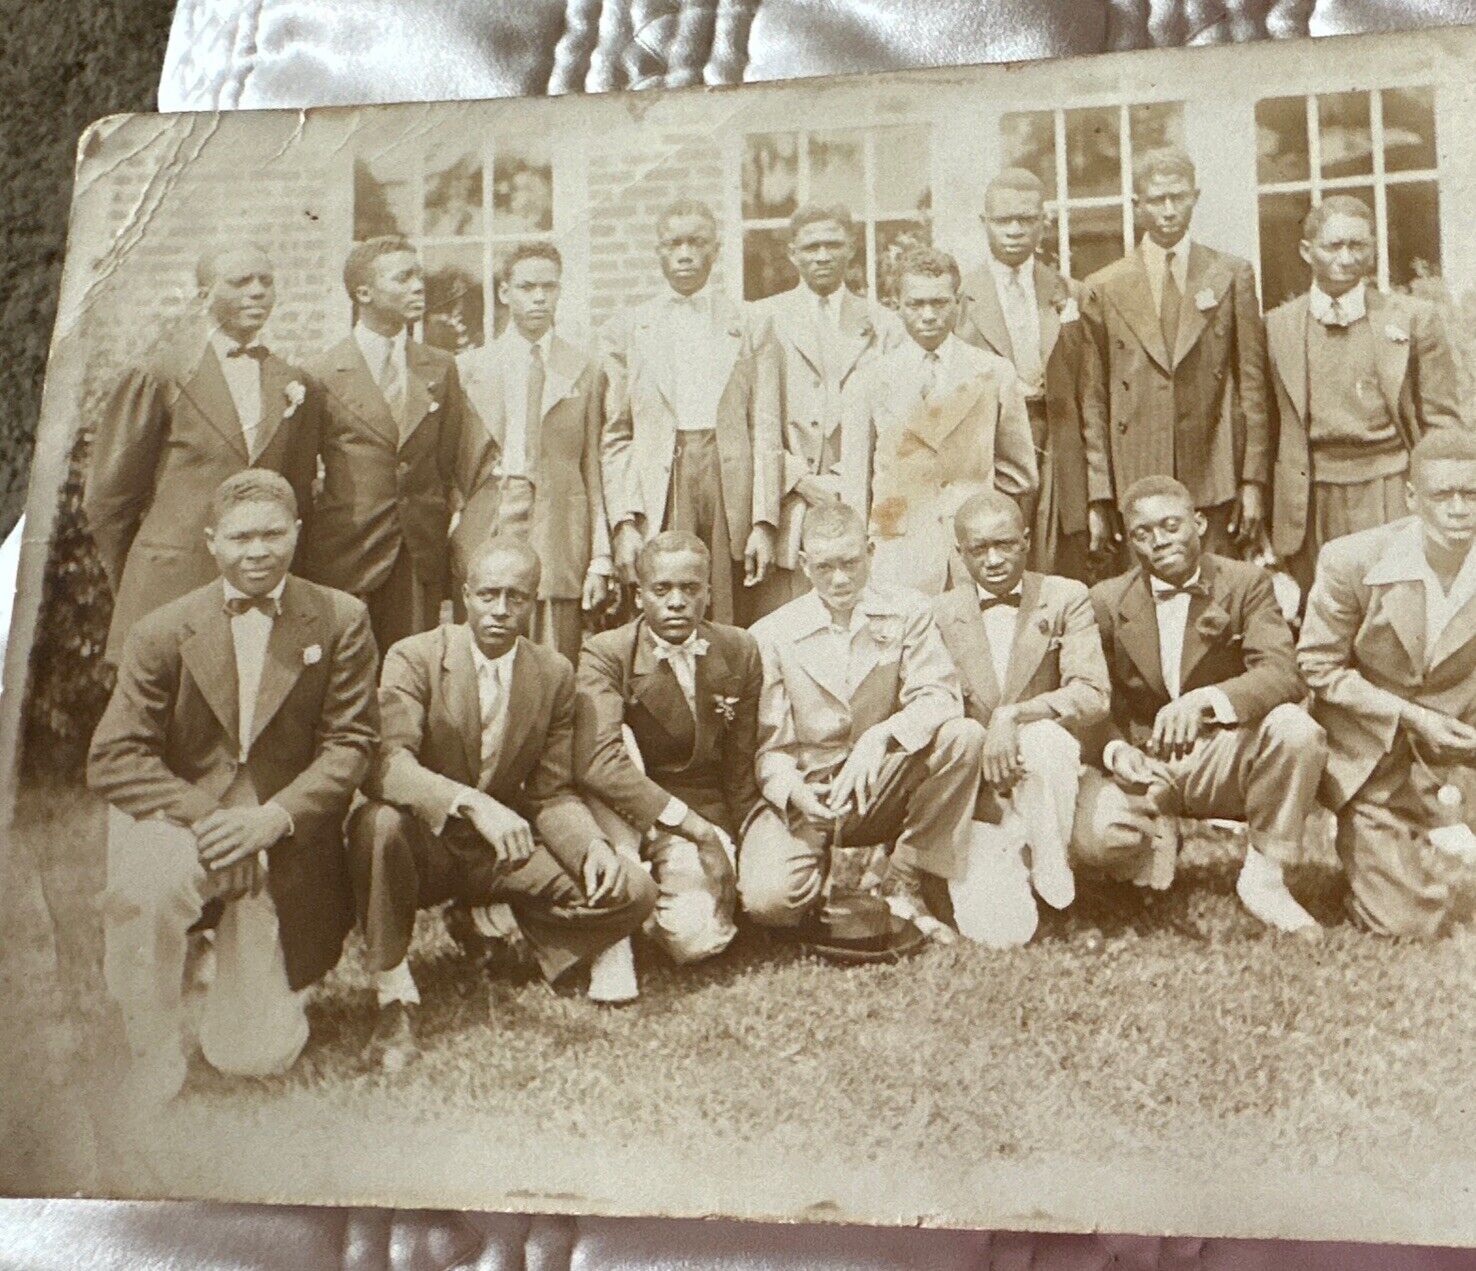 AFRICAN AMERICAN GROUP OF MEN In Snappy Suits Cool Looking High School PHOTO